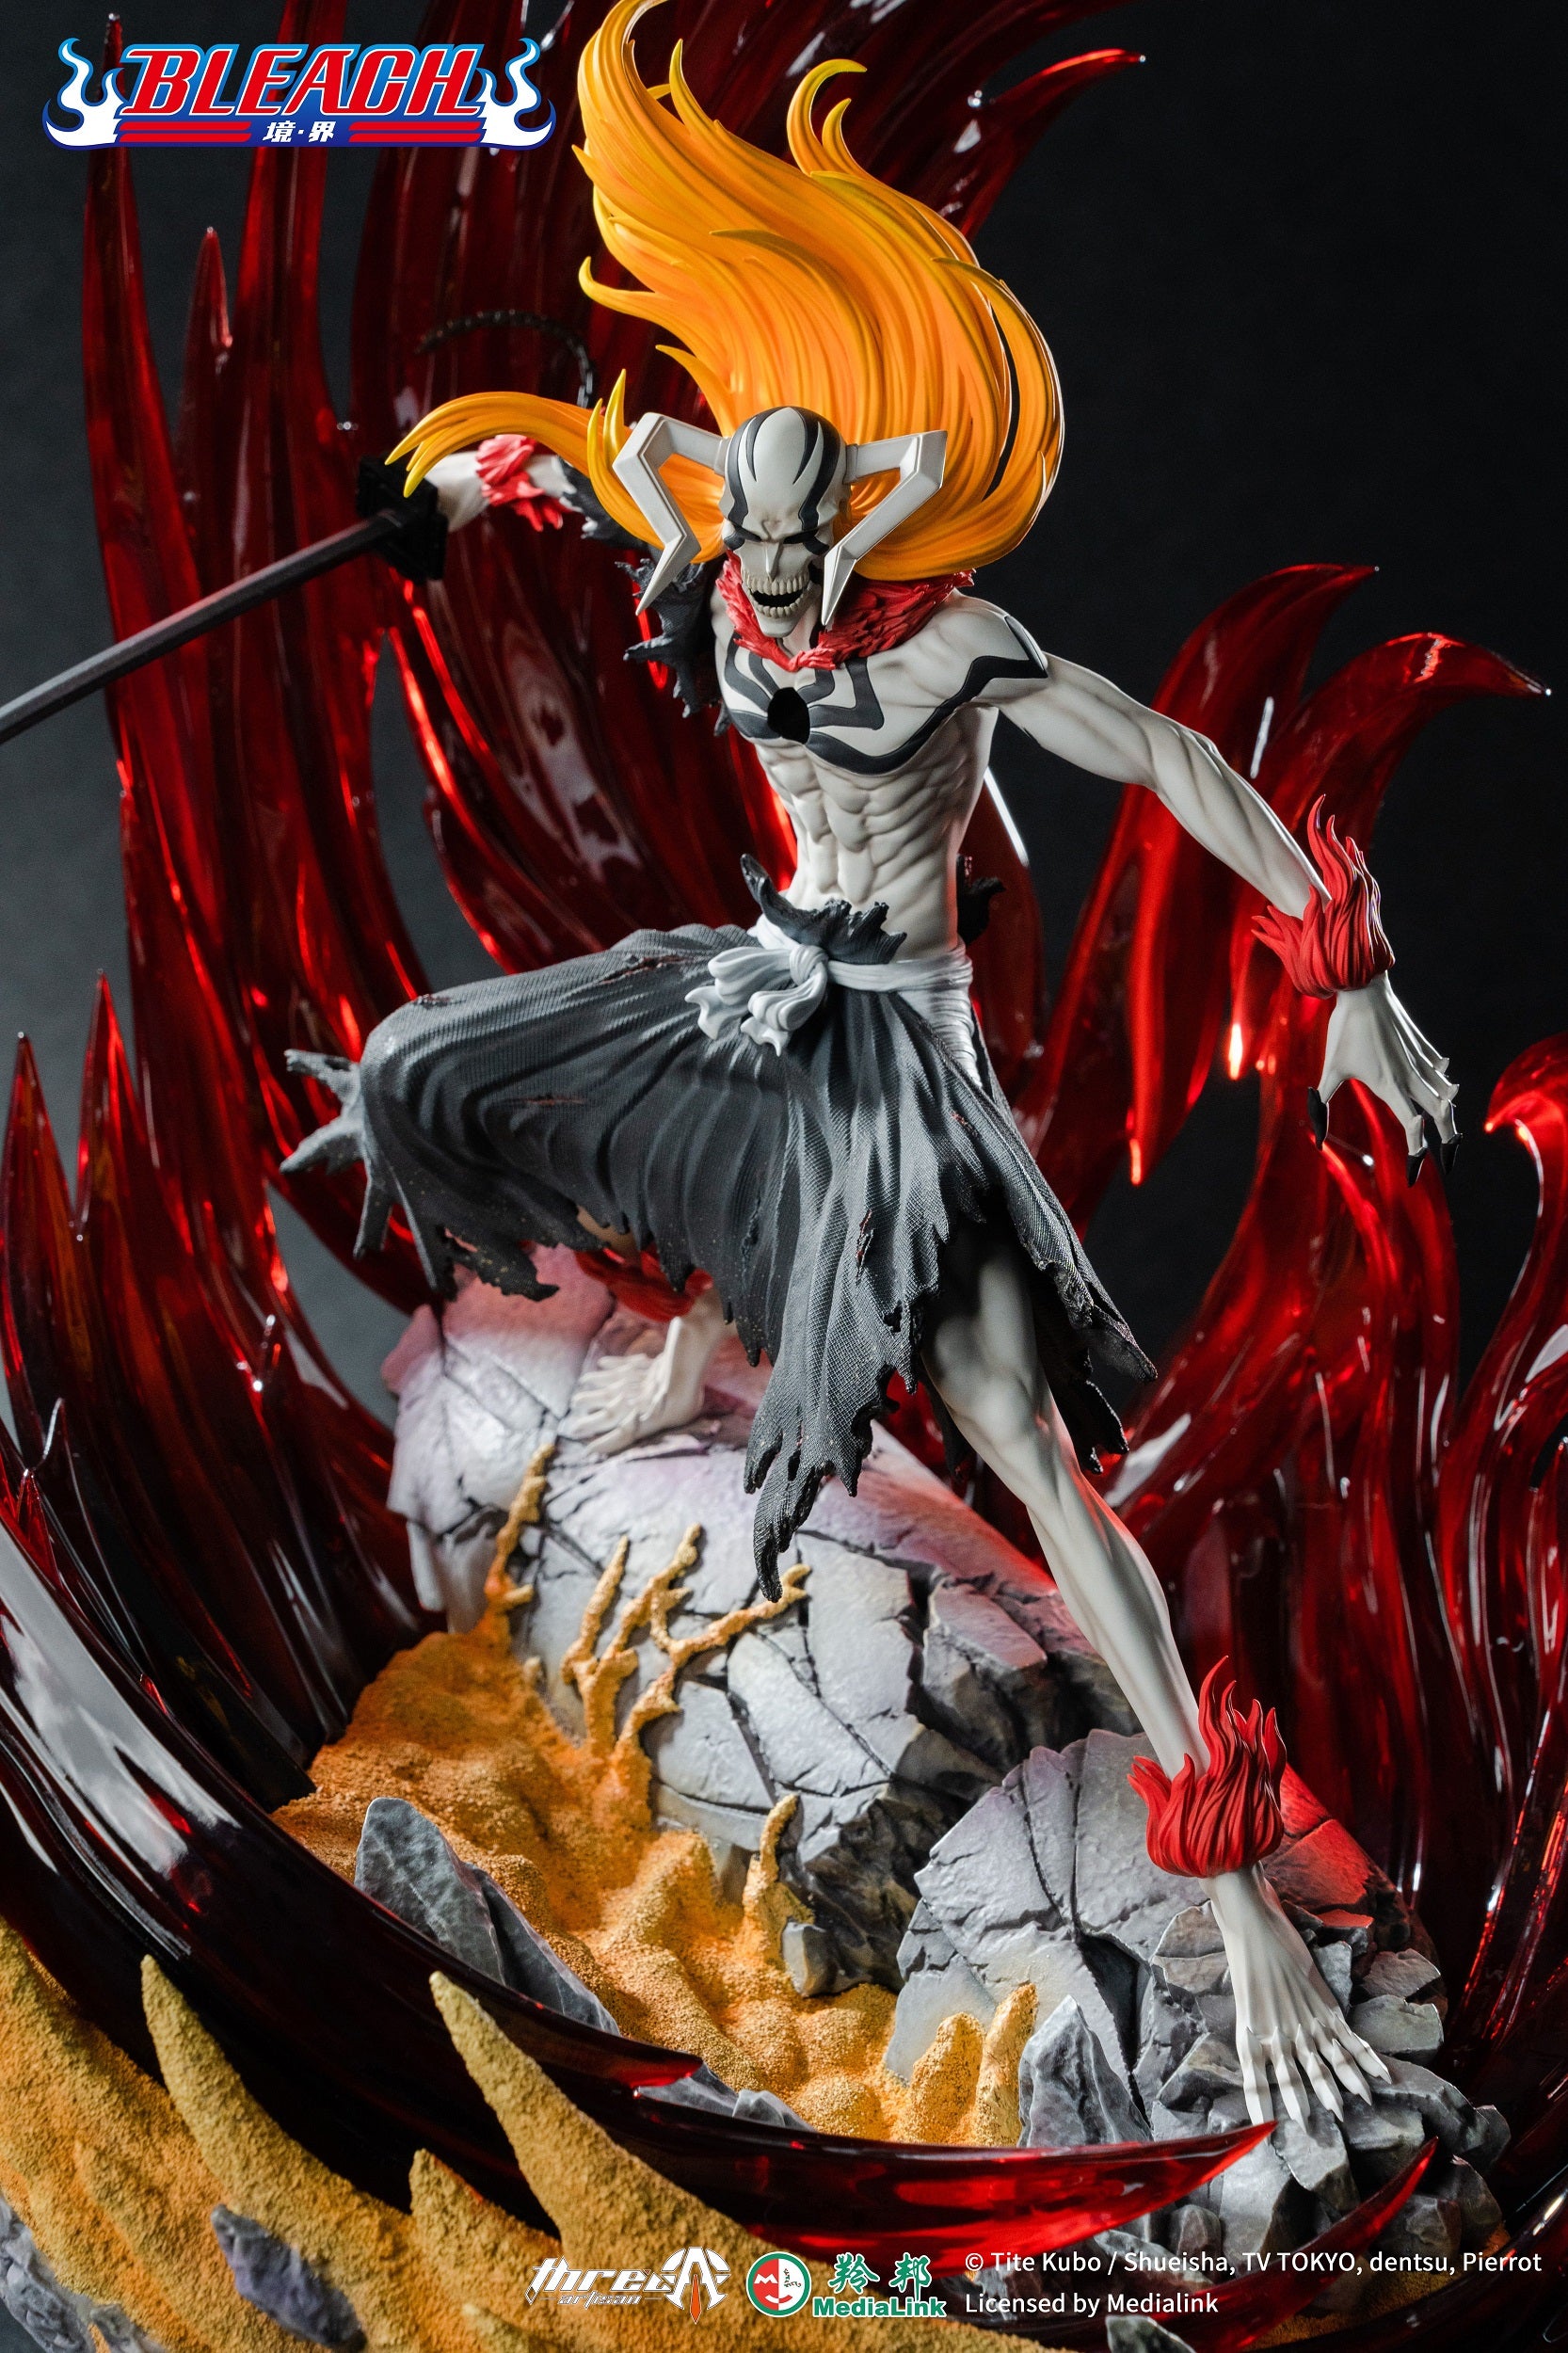 Buy Bandai Anime Heroes Bleach Renji Abarai Action Figure Online |  Kogan.com. MANUFACTURER’S DESCRIPTION Fans of one of the BIG 3 anime  titles can now bring their favourite Bleach characters home with